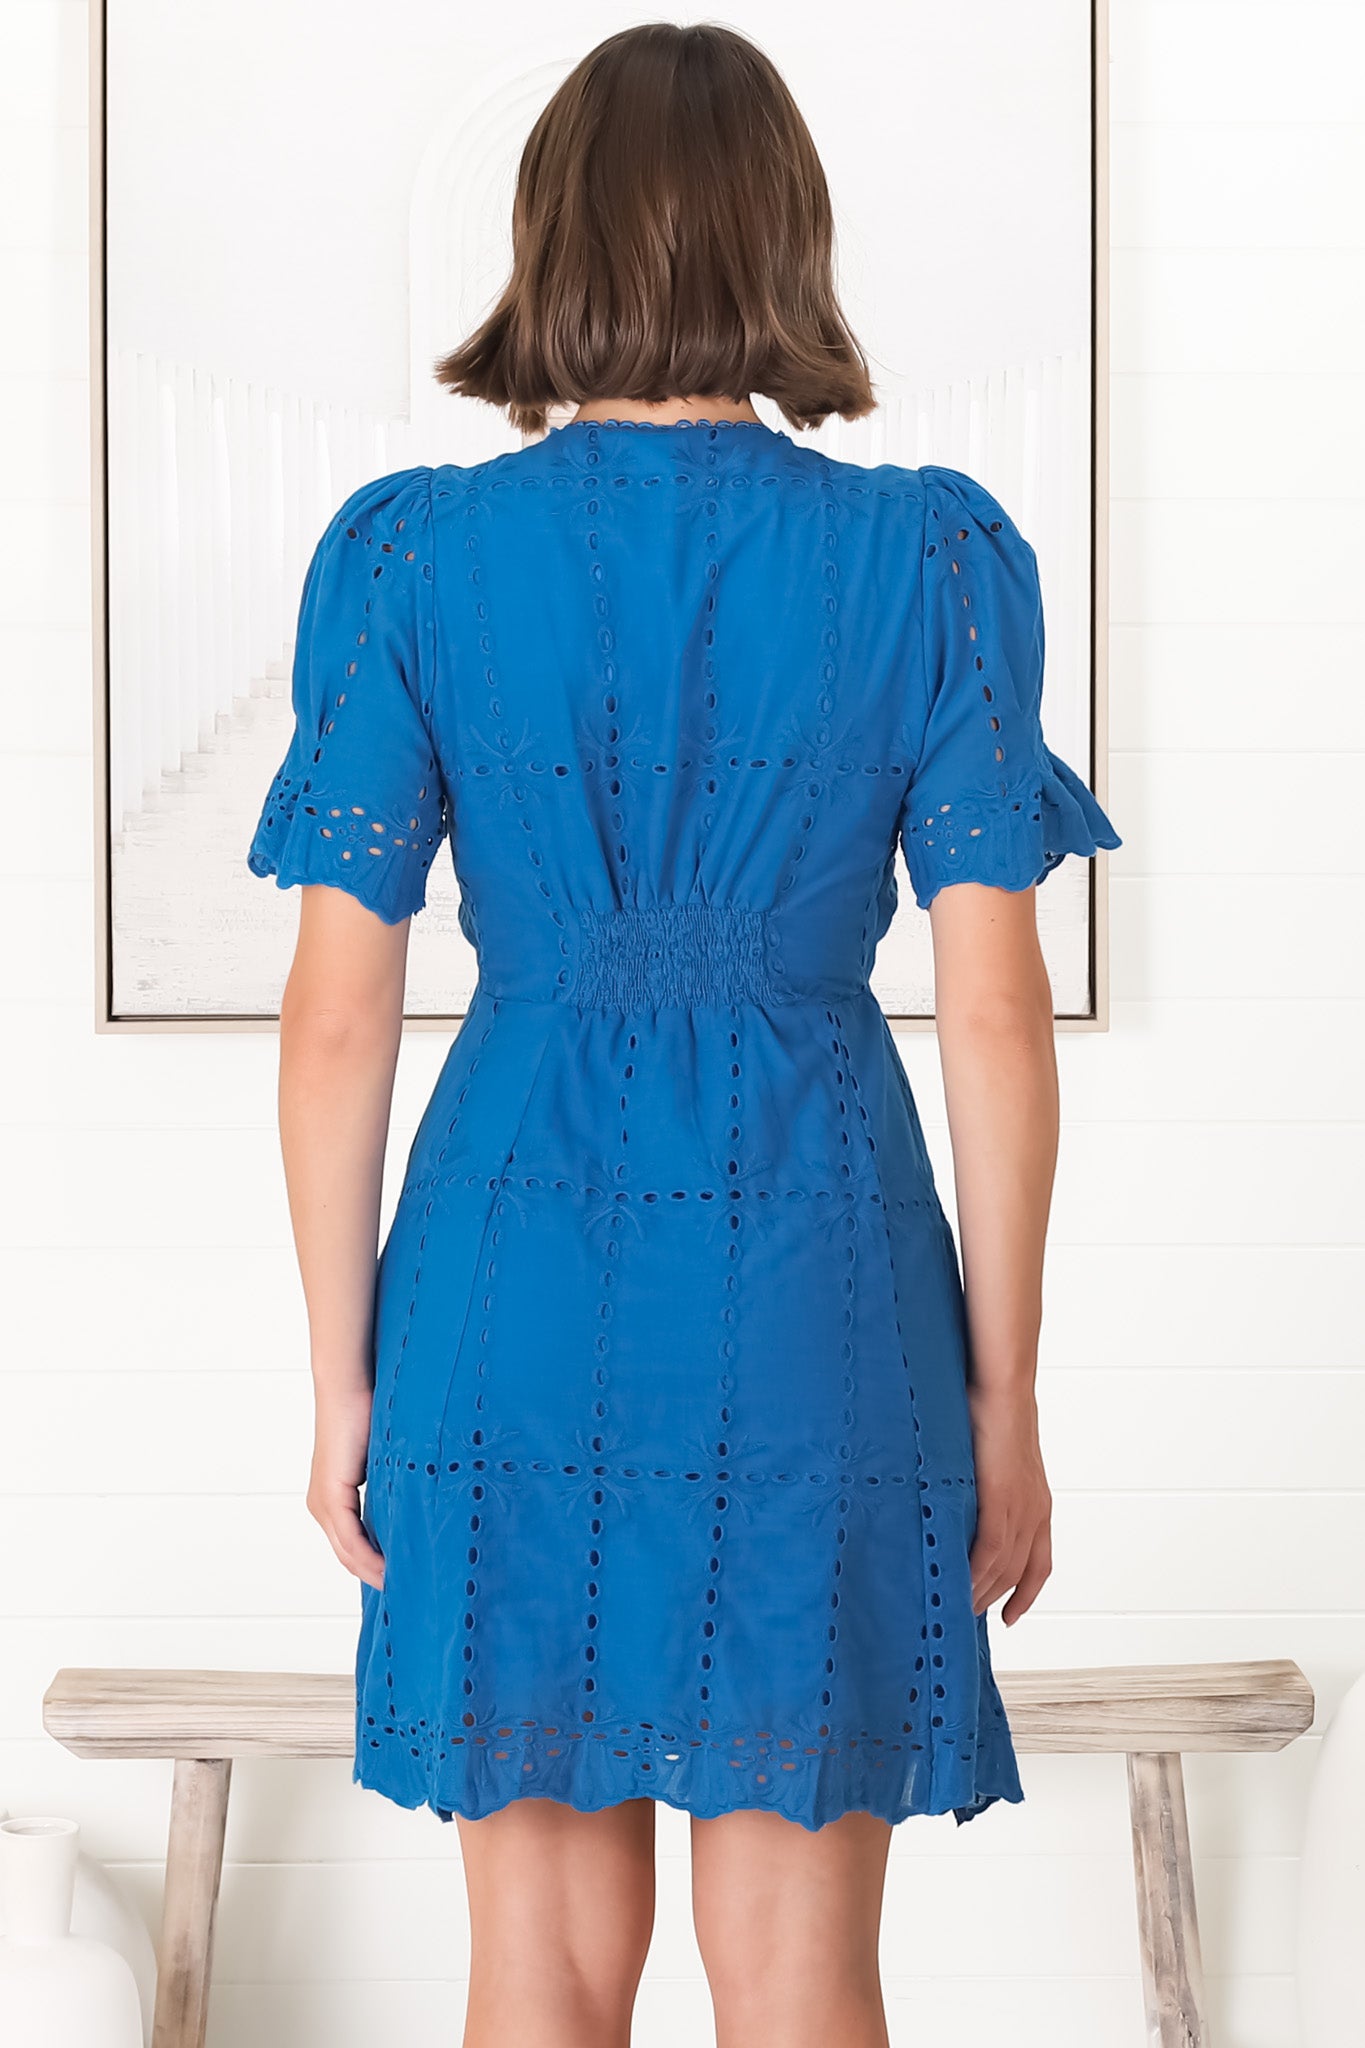 Lumi Mini Dress - Embroided Short Sleeve A Line Dress with Button Decal in Blue